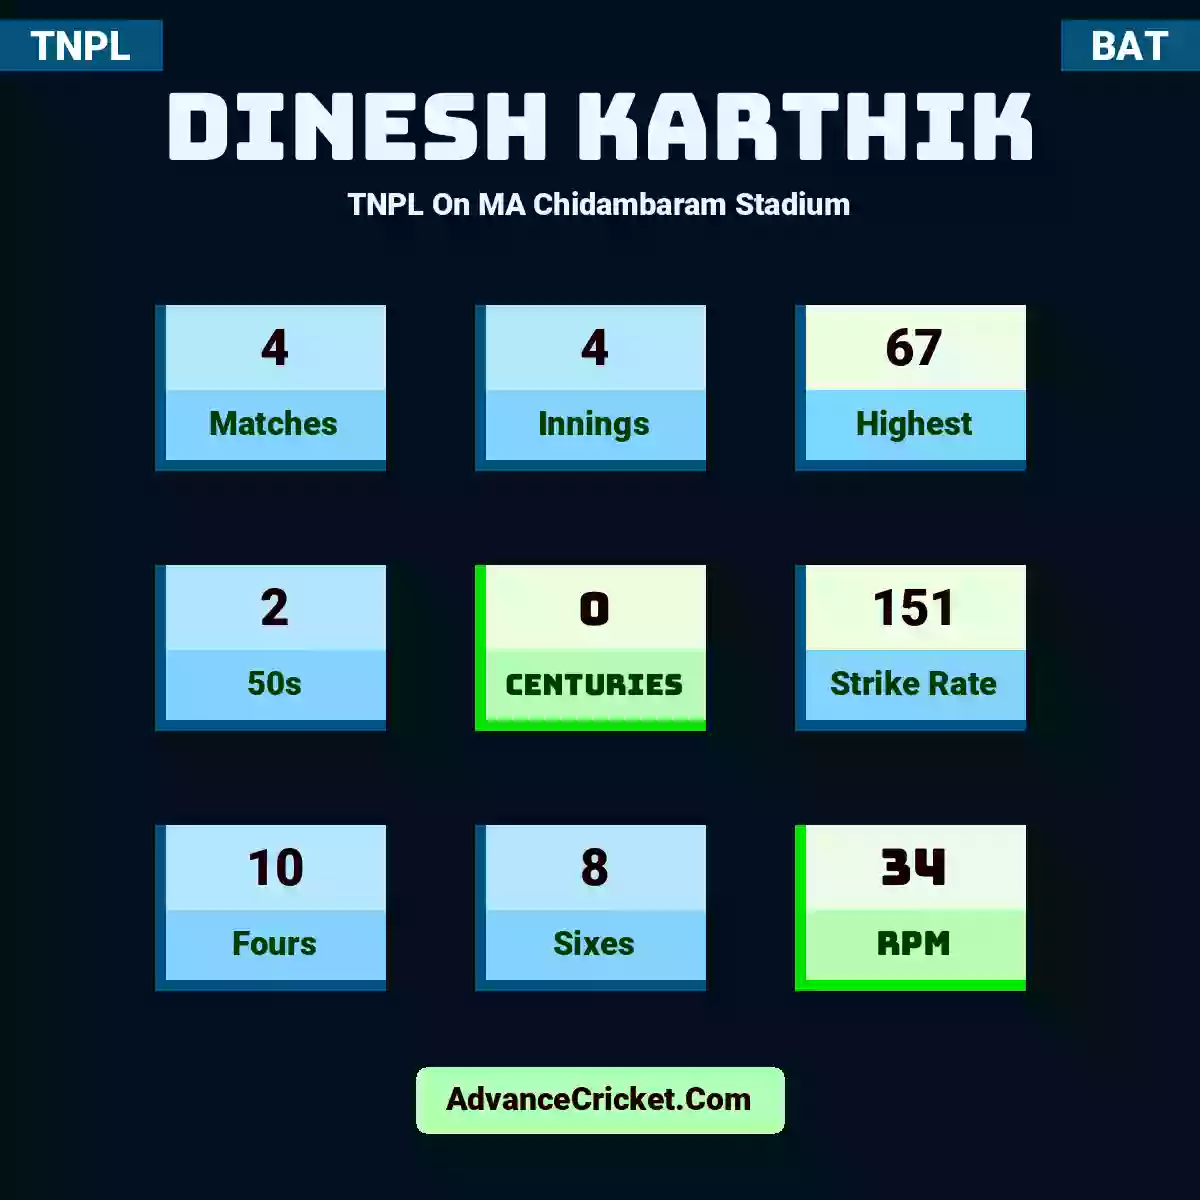 Dinesh Karthik TNPL  On MA Chidambaram Stadium, Dinesh Karthik played 4 matches, scored 67 runs as highest, 2 half-centuries, and 0 centuries, with a strike rate of 151. D.Karthik hit 10 fours and 8 sixes, with an RPM of 34.